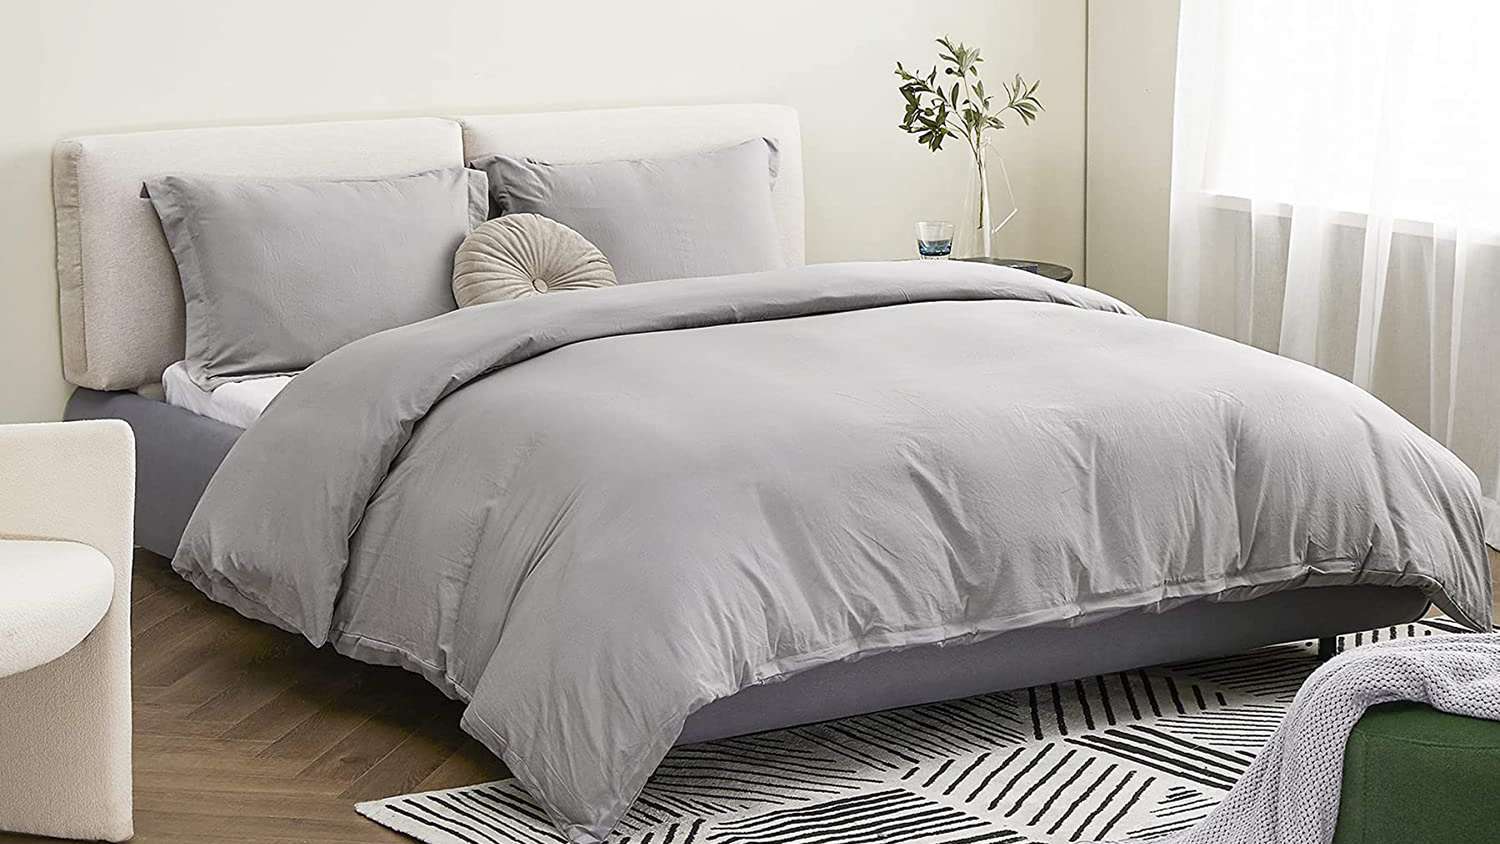 The 16 Best Duvet Covers You Can, Does A Duvet Insert Need Cover